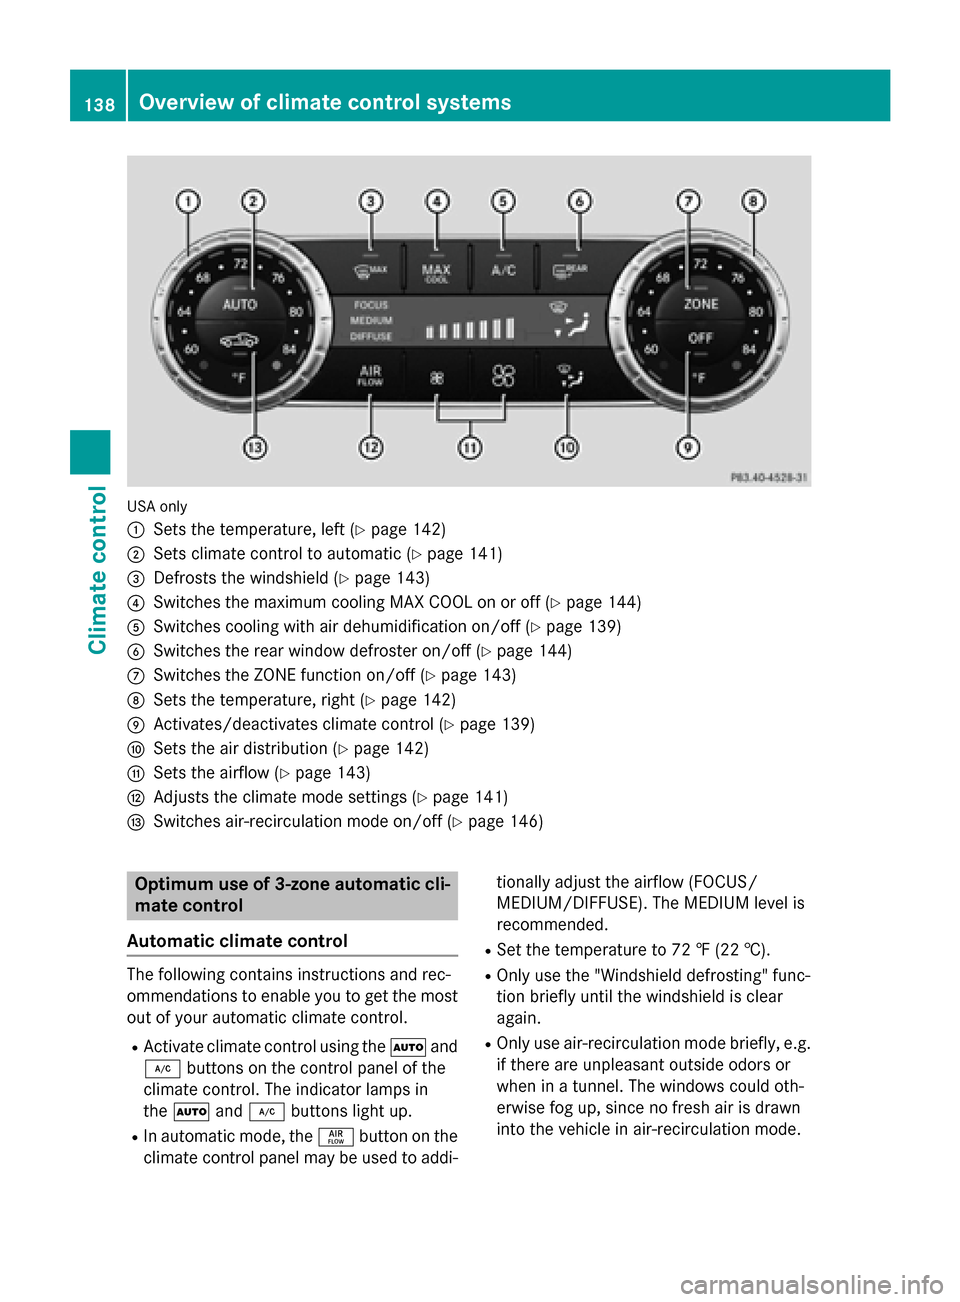 MERCEDES-BENZ SL-Class 2016 R231 User Guide USA only
:
Sets the temperature, left (Ypage 142)
;Sets climate control to automatic (Ypage 141)
=Defrosts the windshield (Ypage 143)
?Switches the maximum cooling MAX COOL on or off (Ypage 144)
ASwit